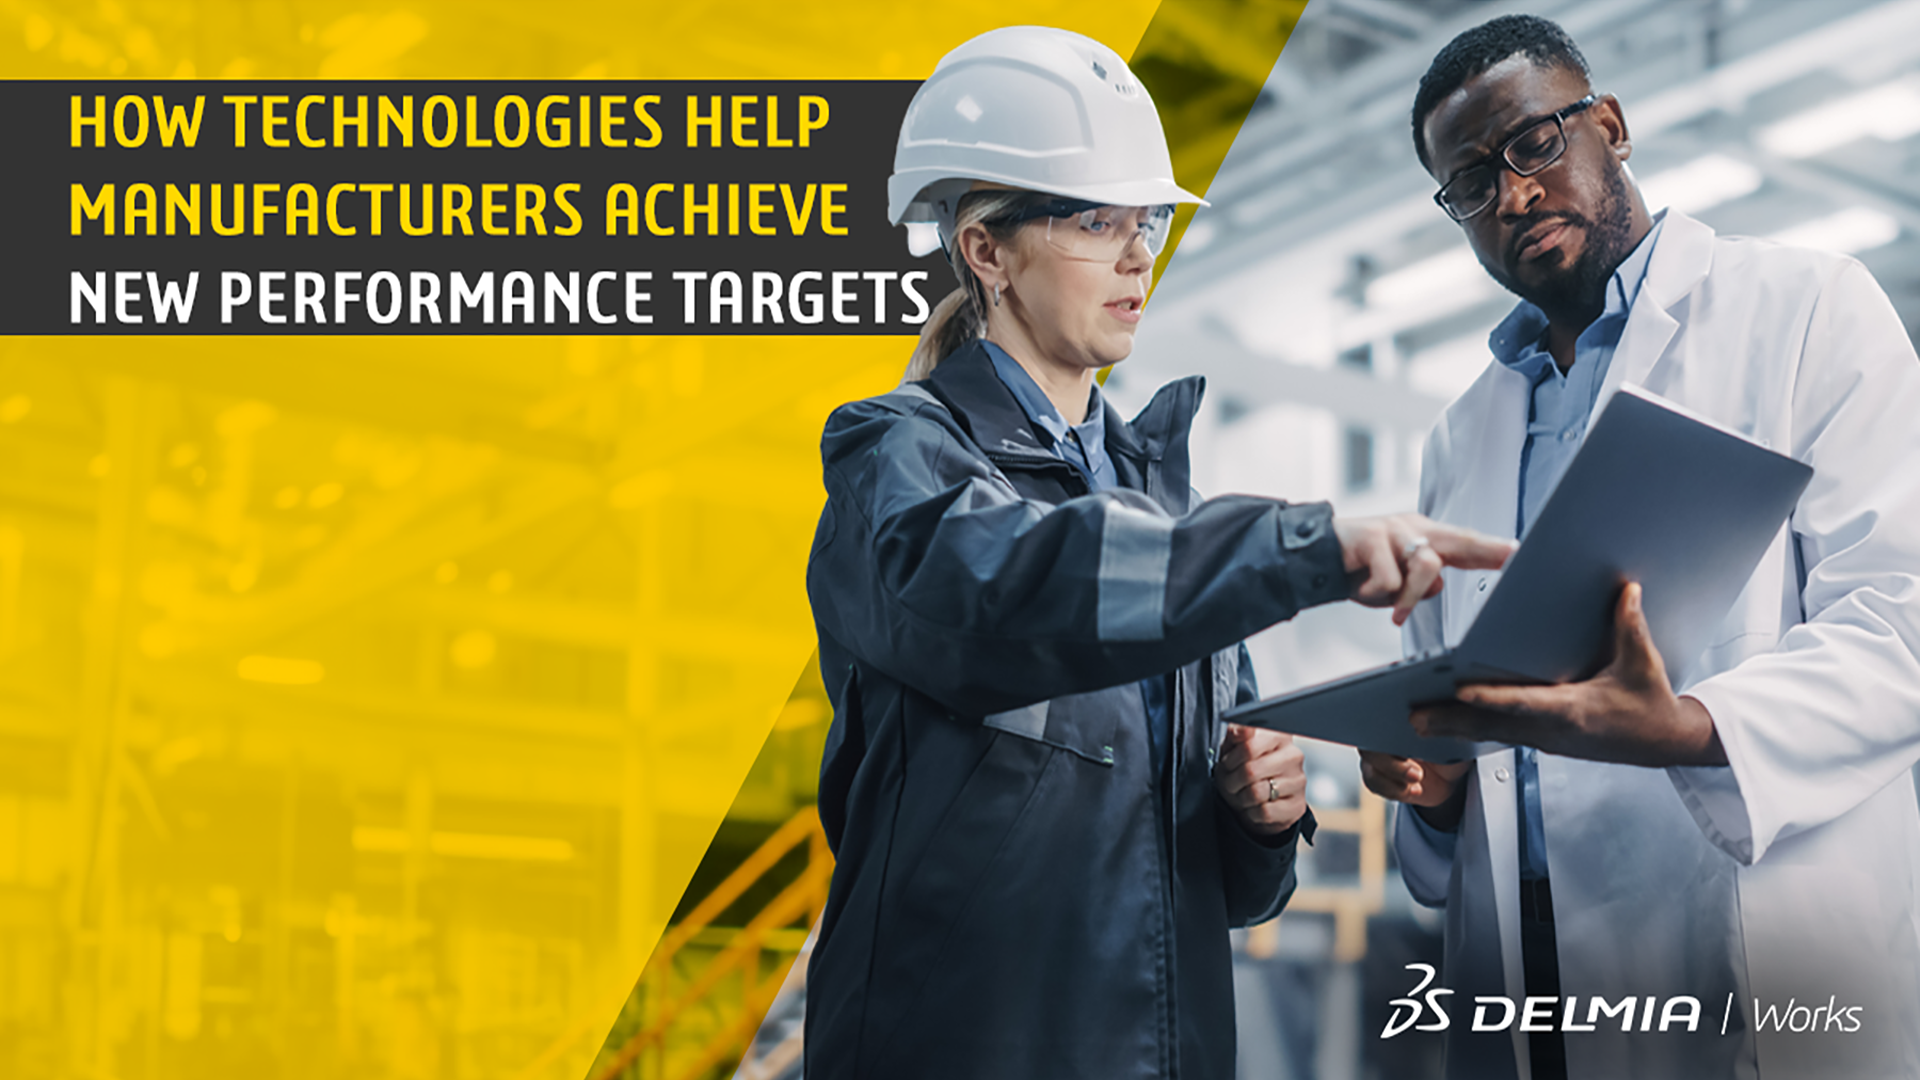 How Technology Can Help Manufacturers Achieve New Performance Targets